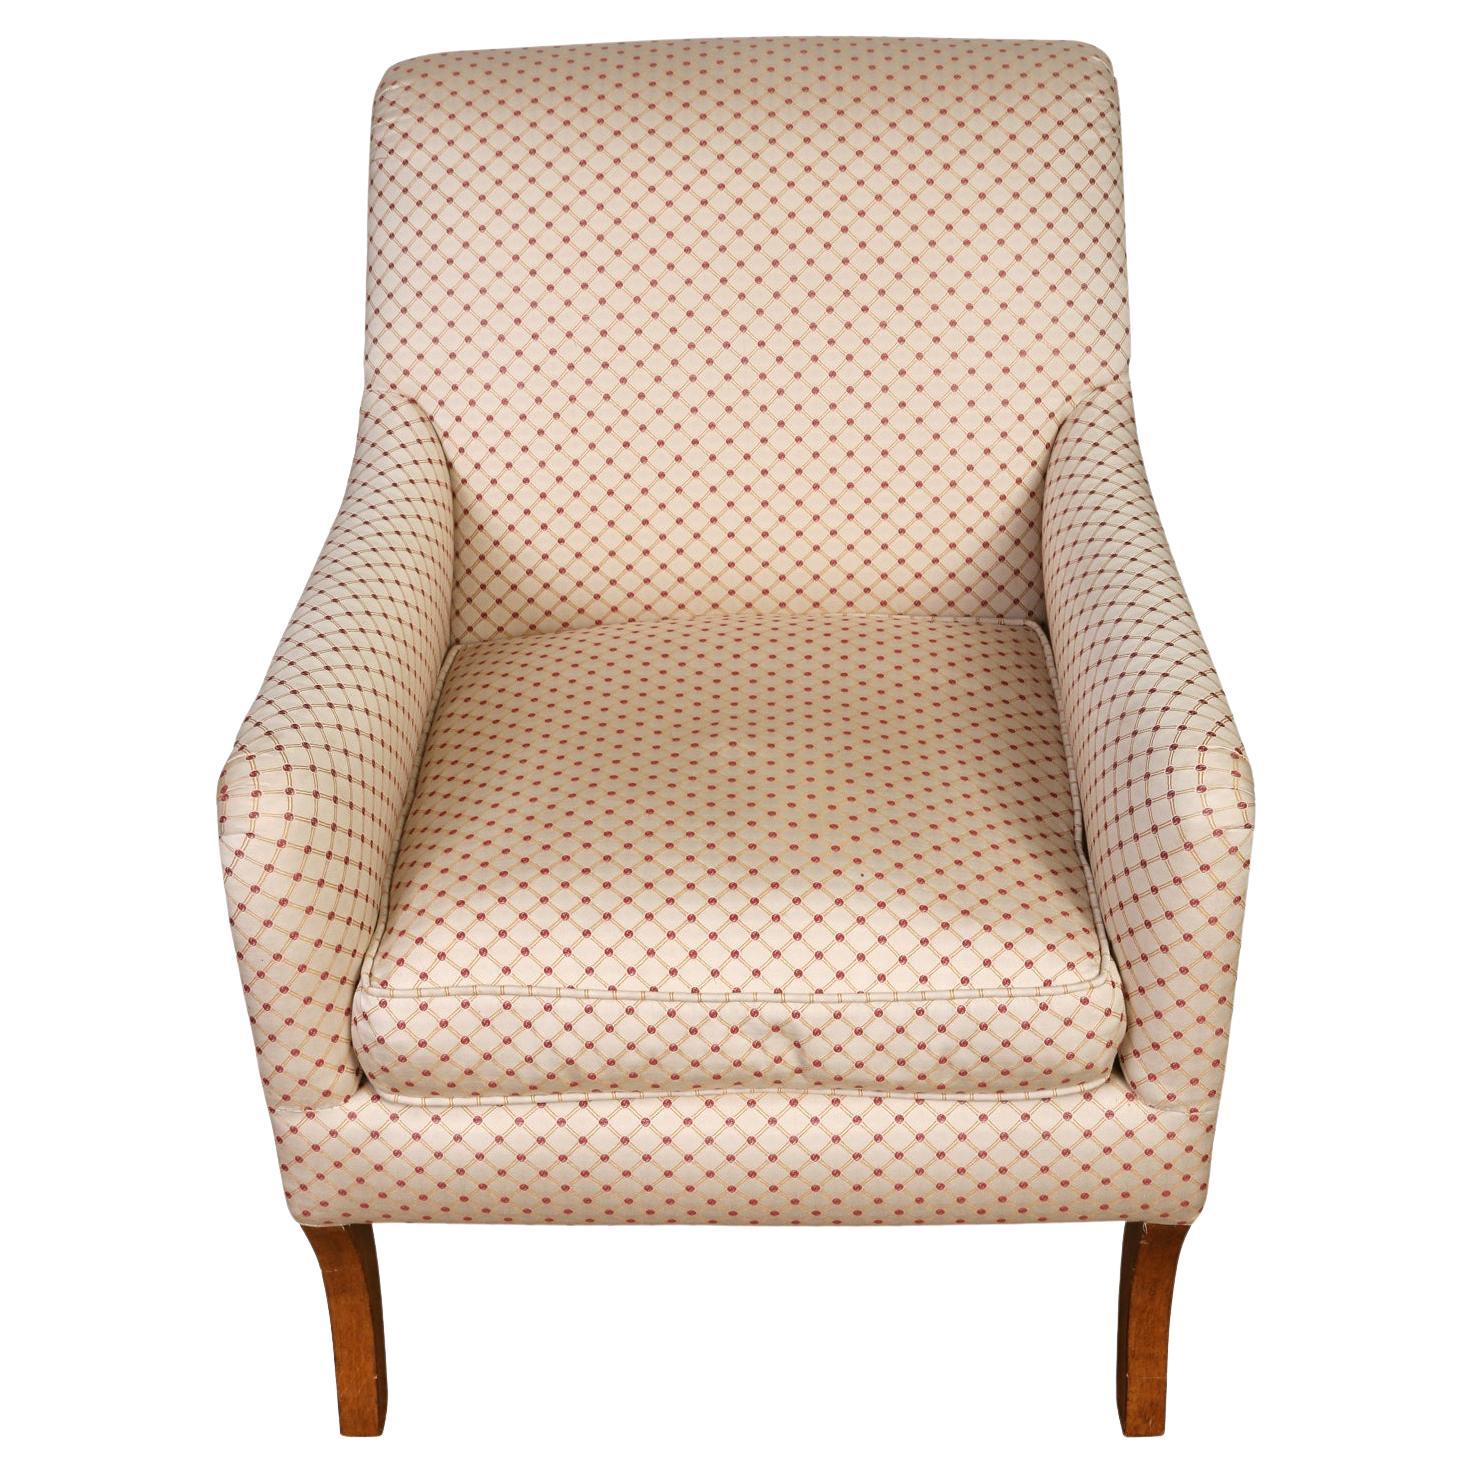 Vintage Upholstered Diamond Print Club Chair, A. Rudin For Sale